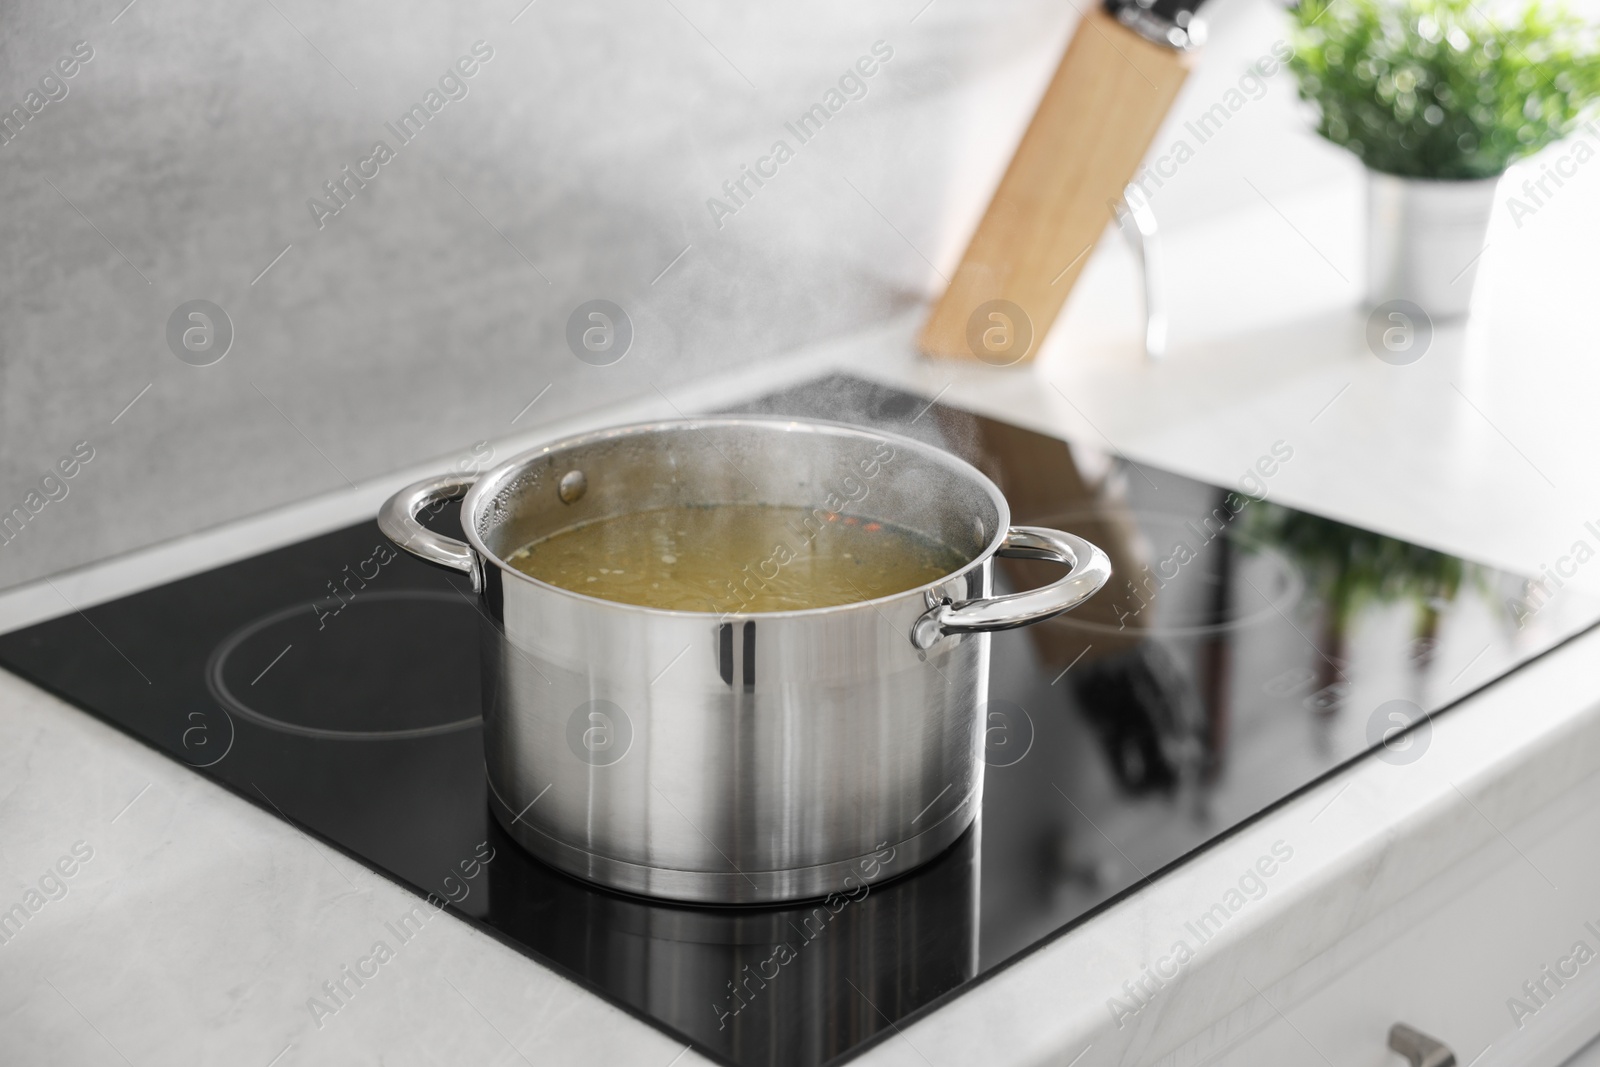 Photo of Pot with delicious soup on cooktop in kitchen